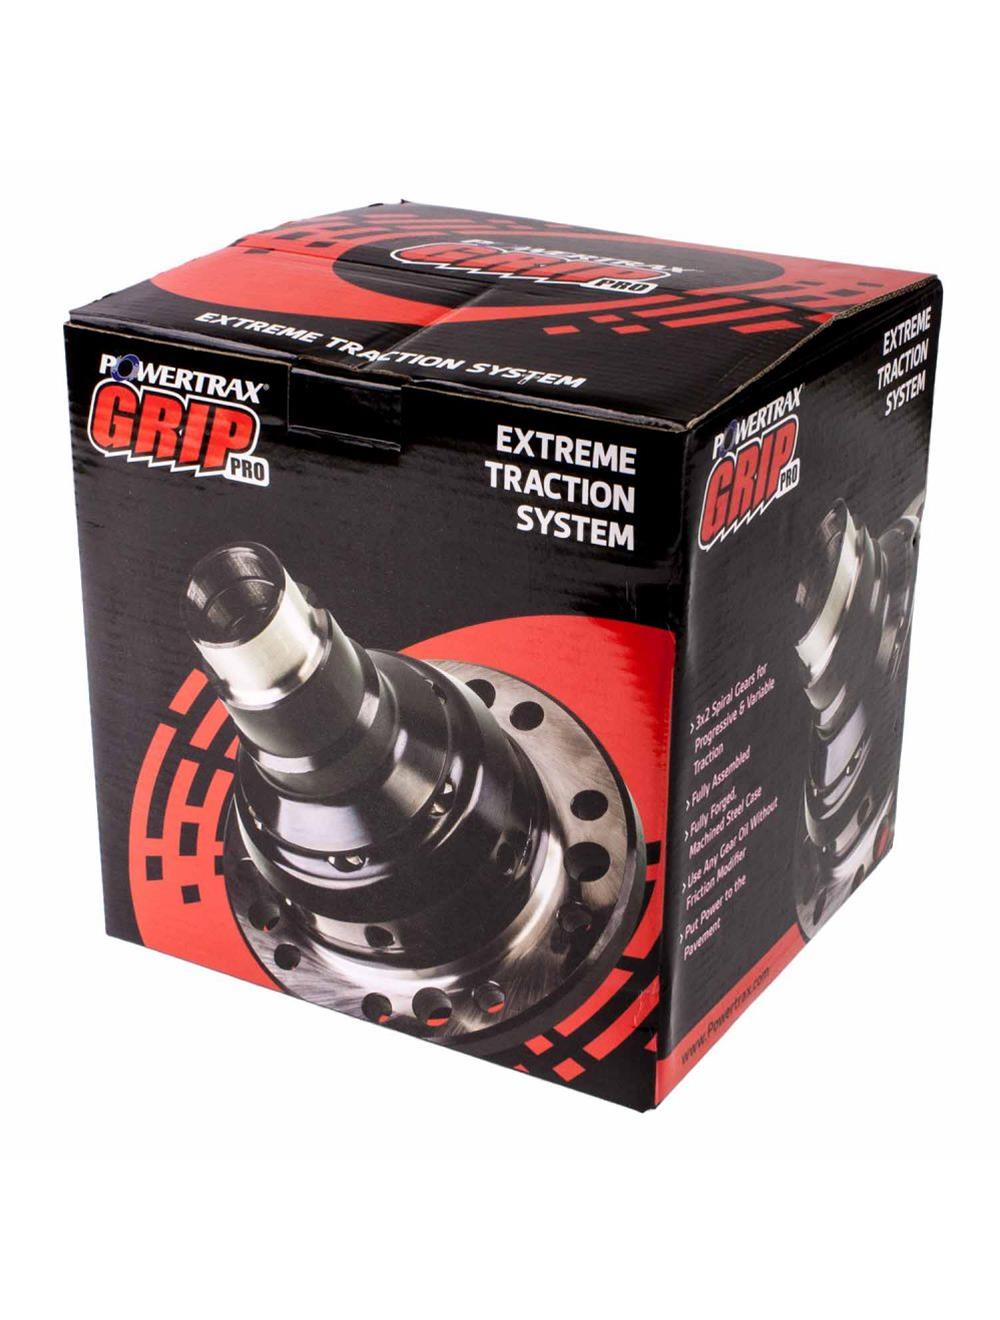 Powertrax Grip Pro Traction Systems